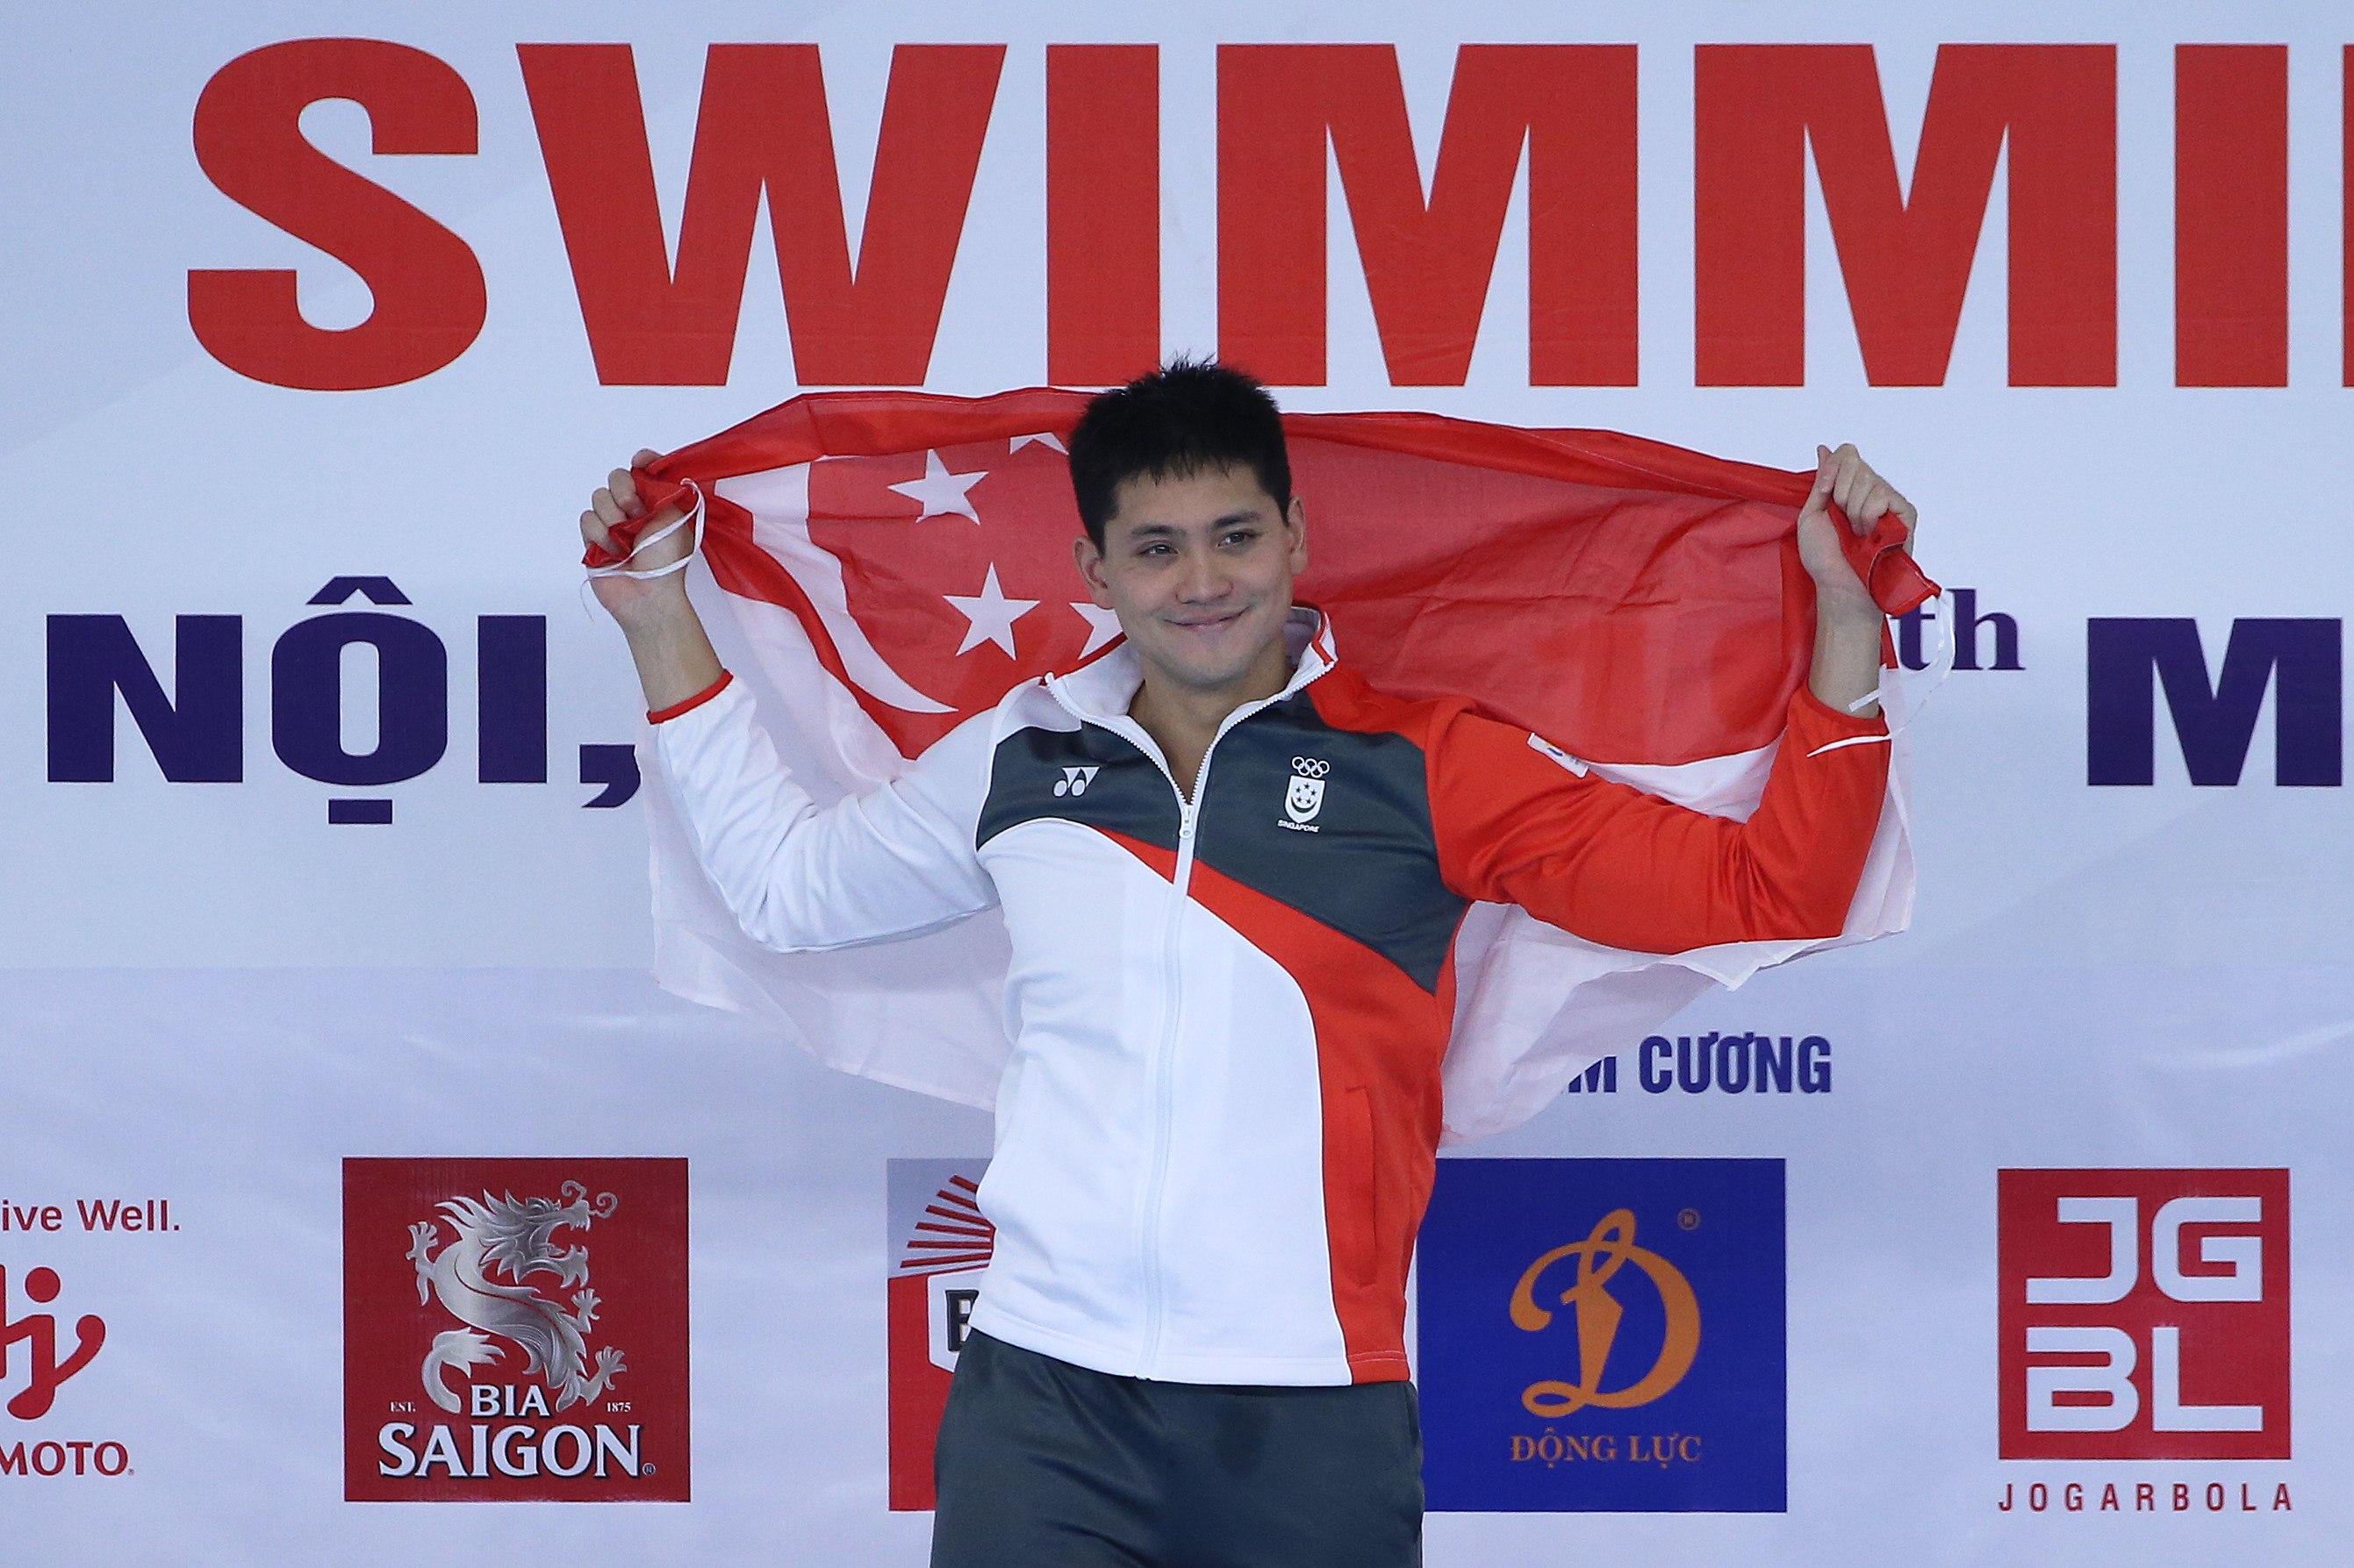 Singapore’s first-ever Olympic champion Joseph Schooling, who beat Michael Phelps at the 100m butterfly in 2016, said Wednesday he will skip the upcoming Southeast Asian Games in Phnom Penh. Photo: EPA-EFE/File